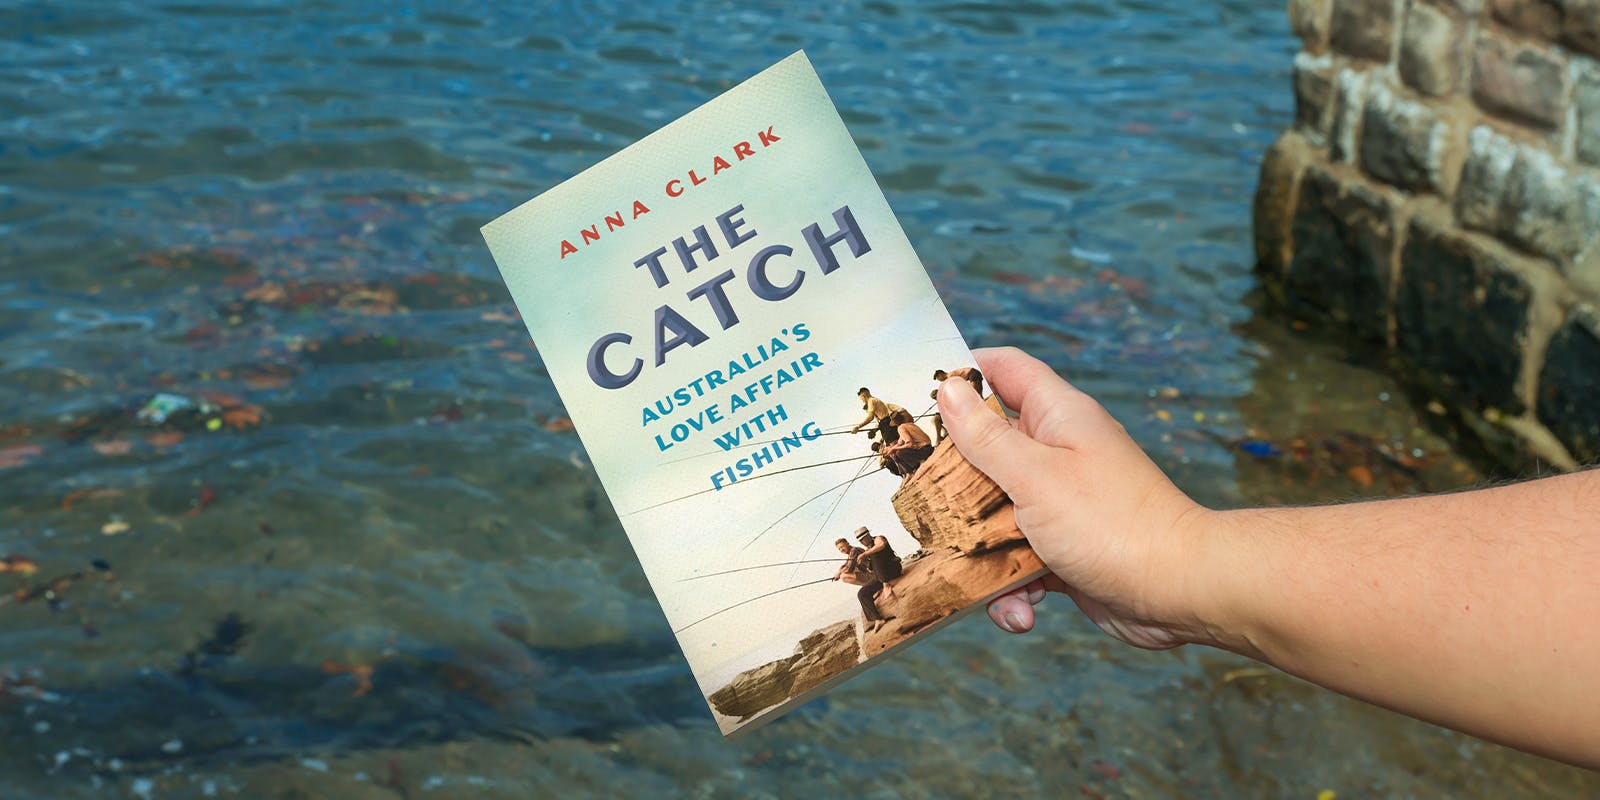 Anna Clark shares what she's learned by writing about her